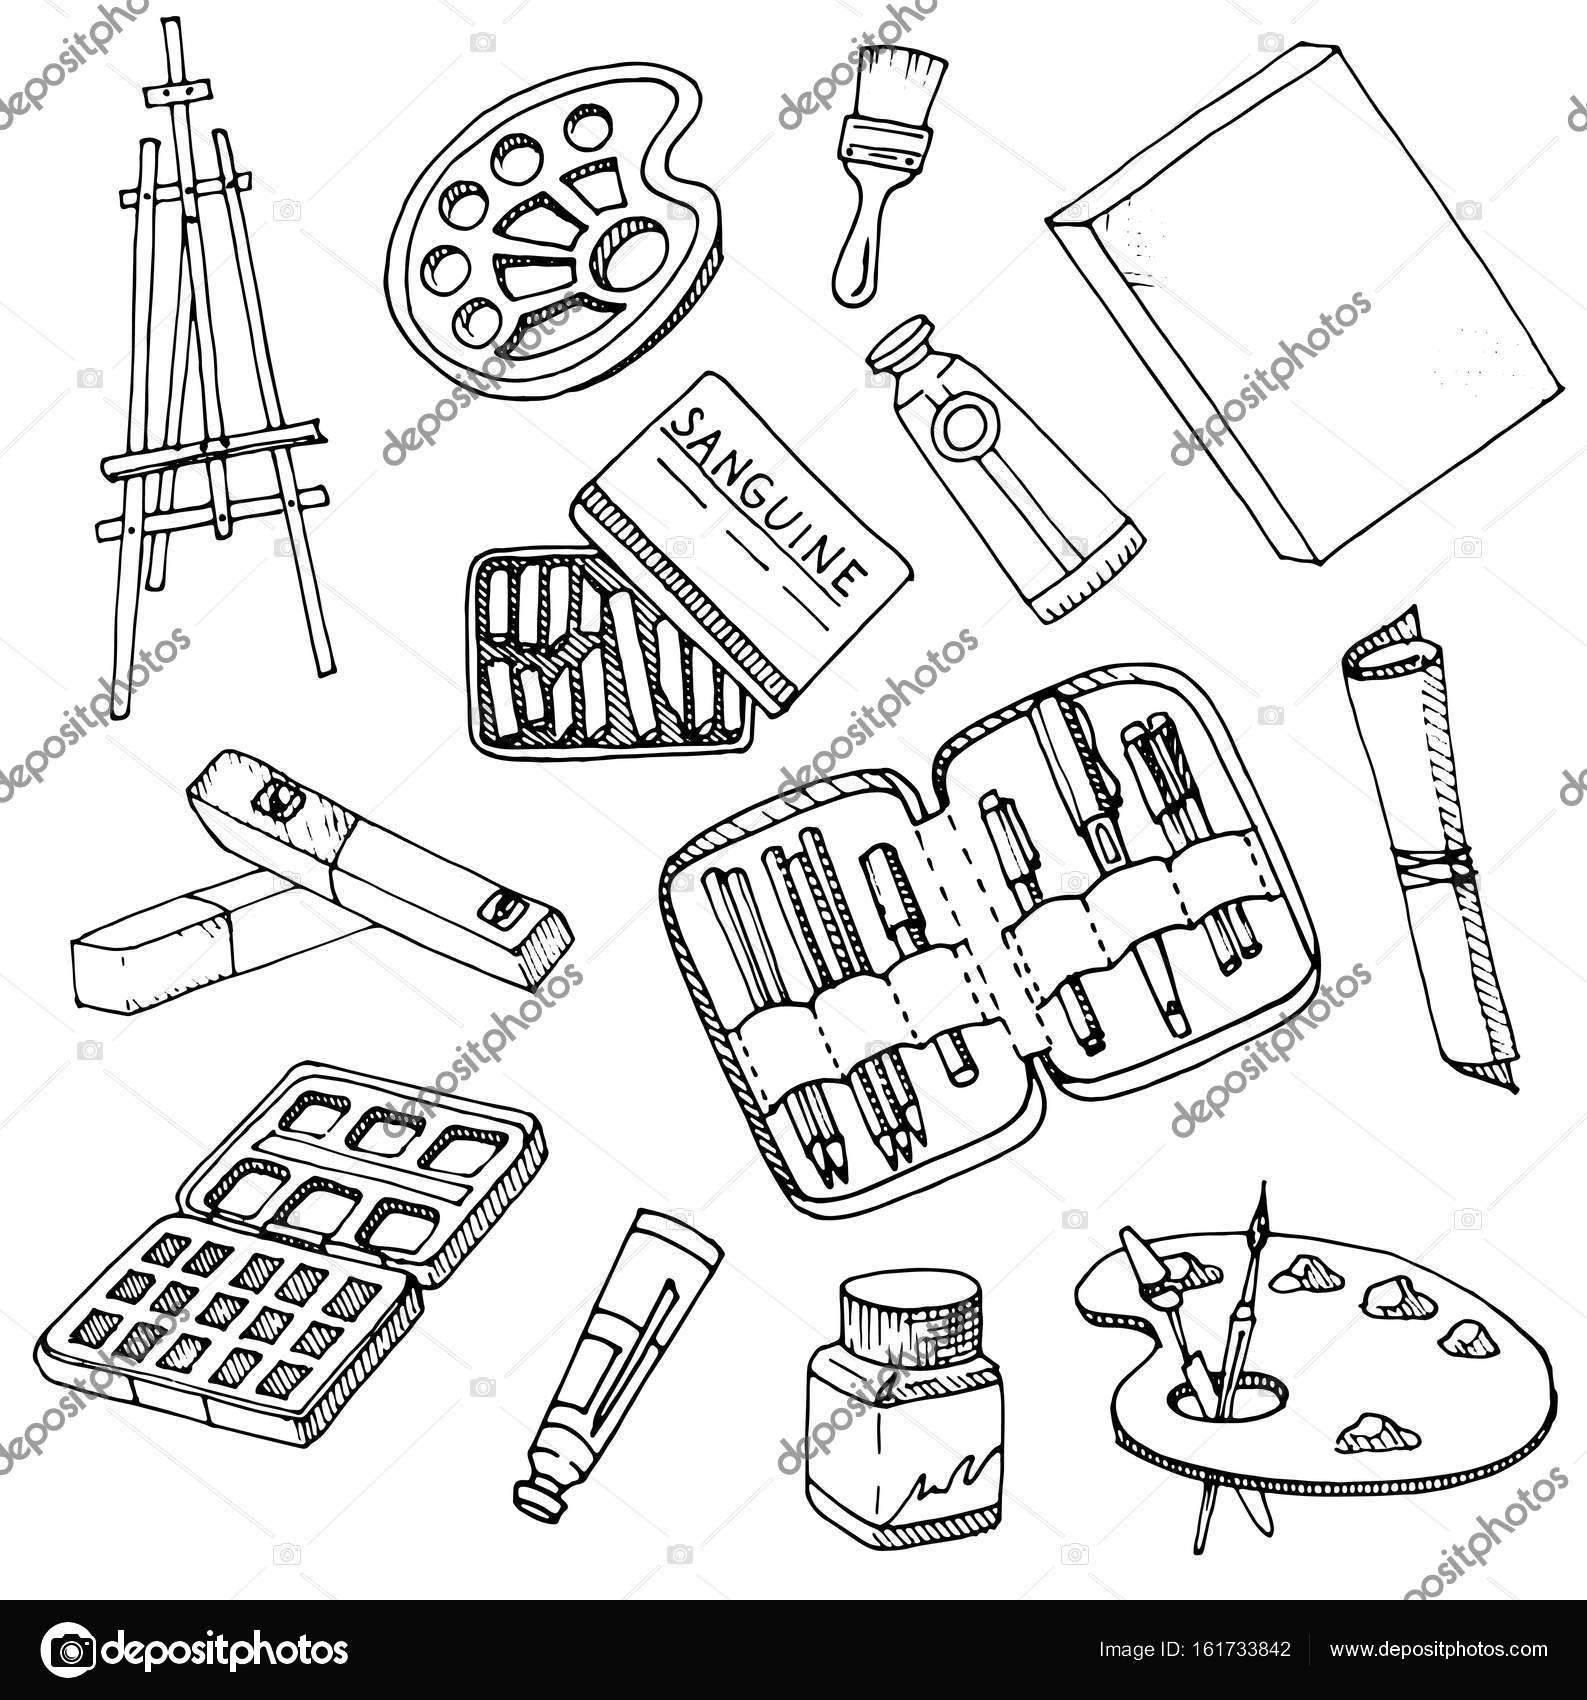 Hand Drawn Vector Doodle Illustration of Art Supplies. Stock